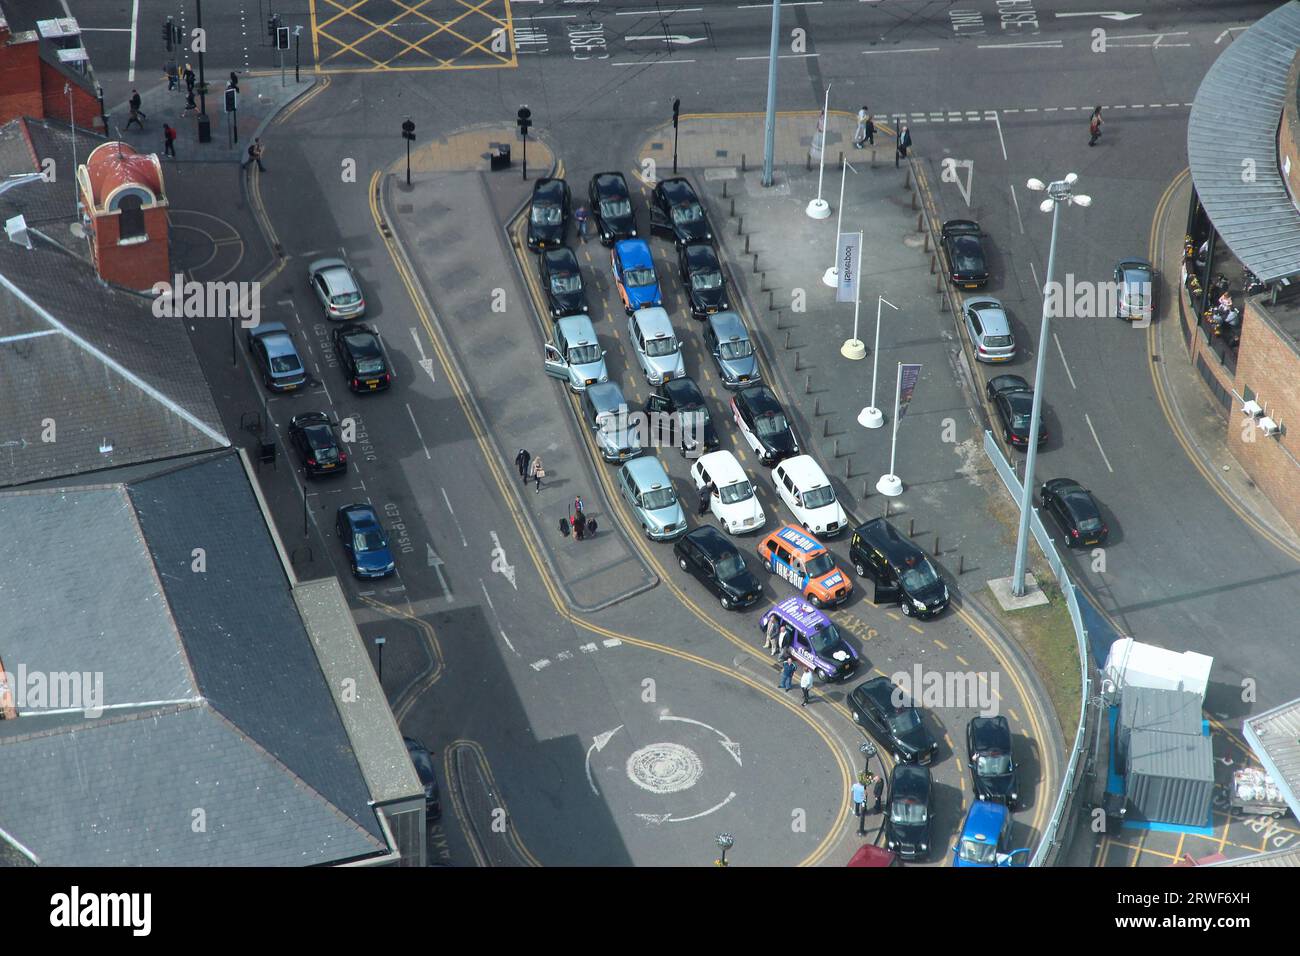 LIVERPOOL, UK - APRIL 20, 2013: Public transportation aerial view in Liverpool, UK. Taxi cab stand. Stock Photo